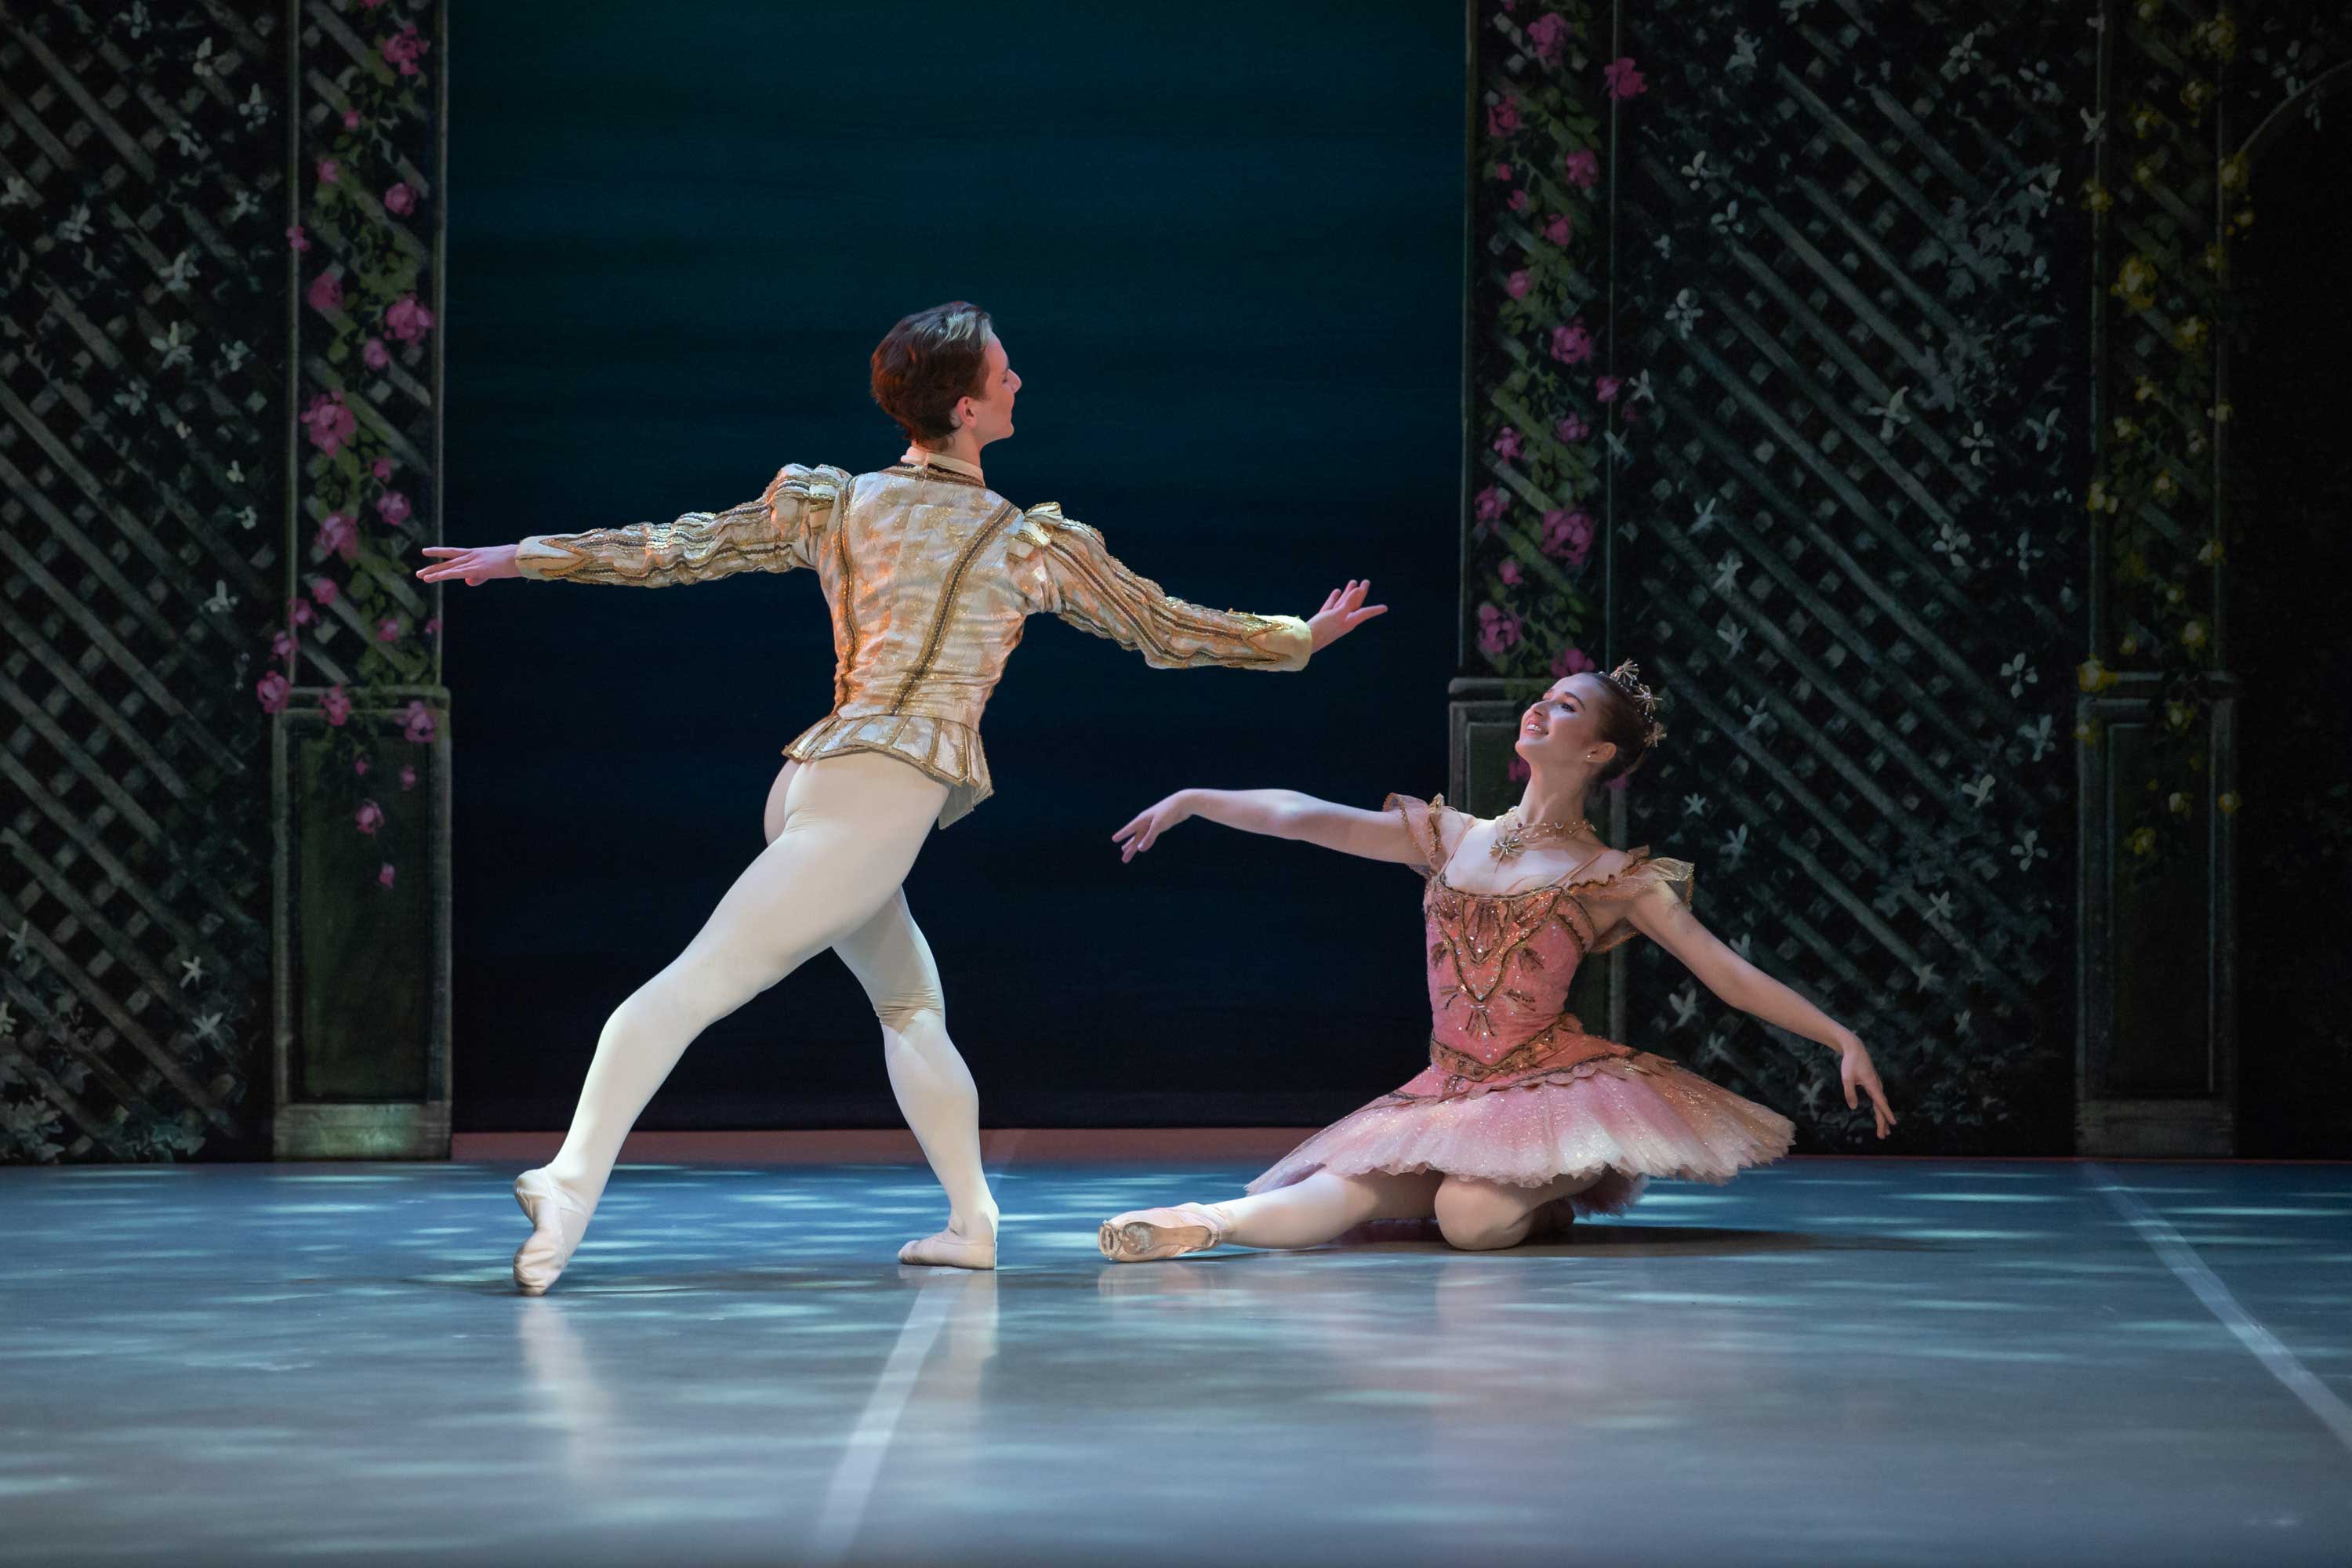 Eric-Snyder-as-Prince-Désiré-and-Evelina-Andersson-as-Aurora-in-My-First-Ballet-Sleeping-Beauty-(c)-Photography-by-ASH-(3)